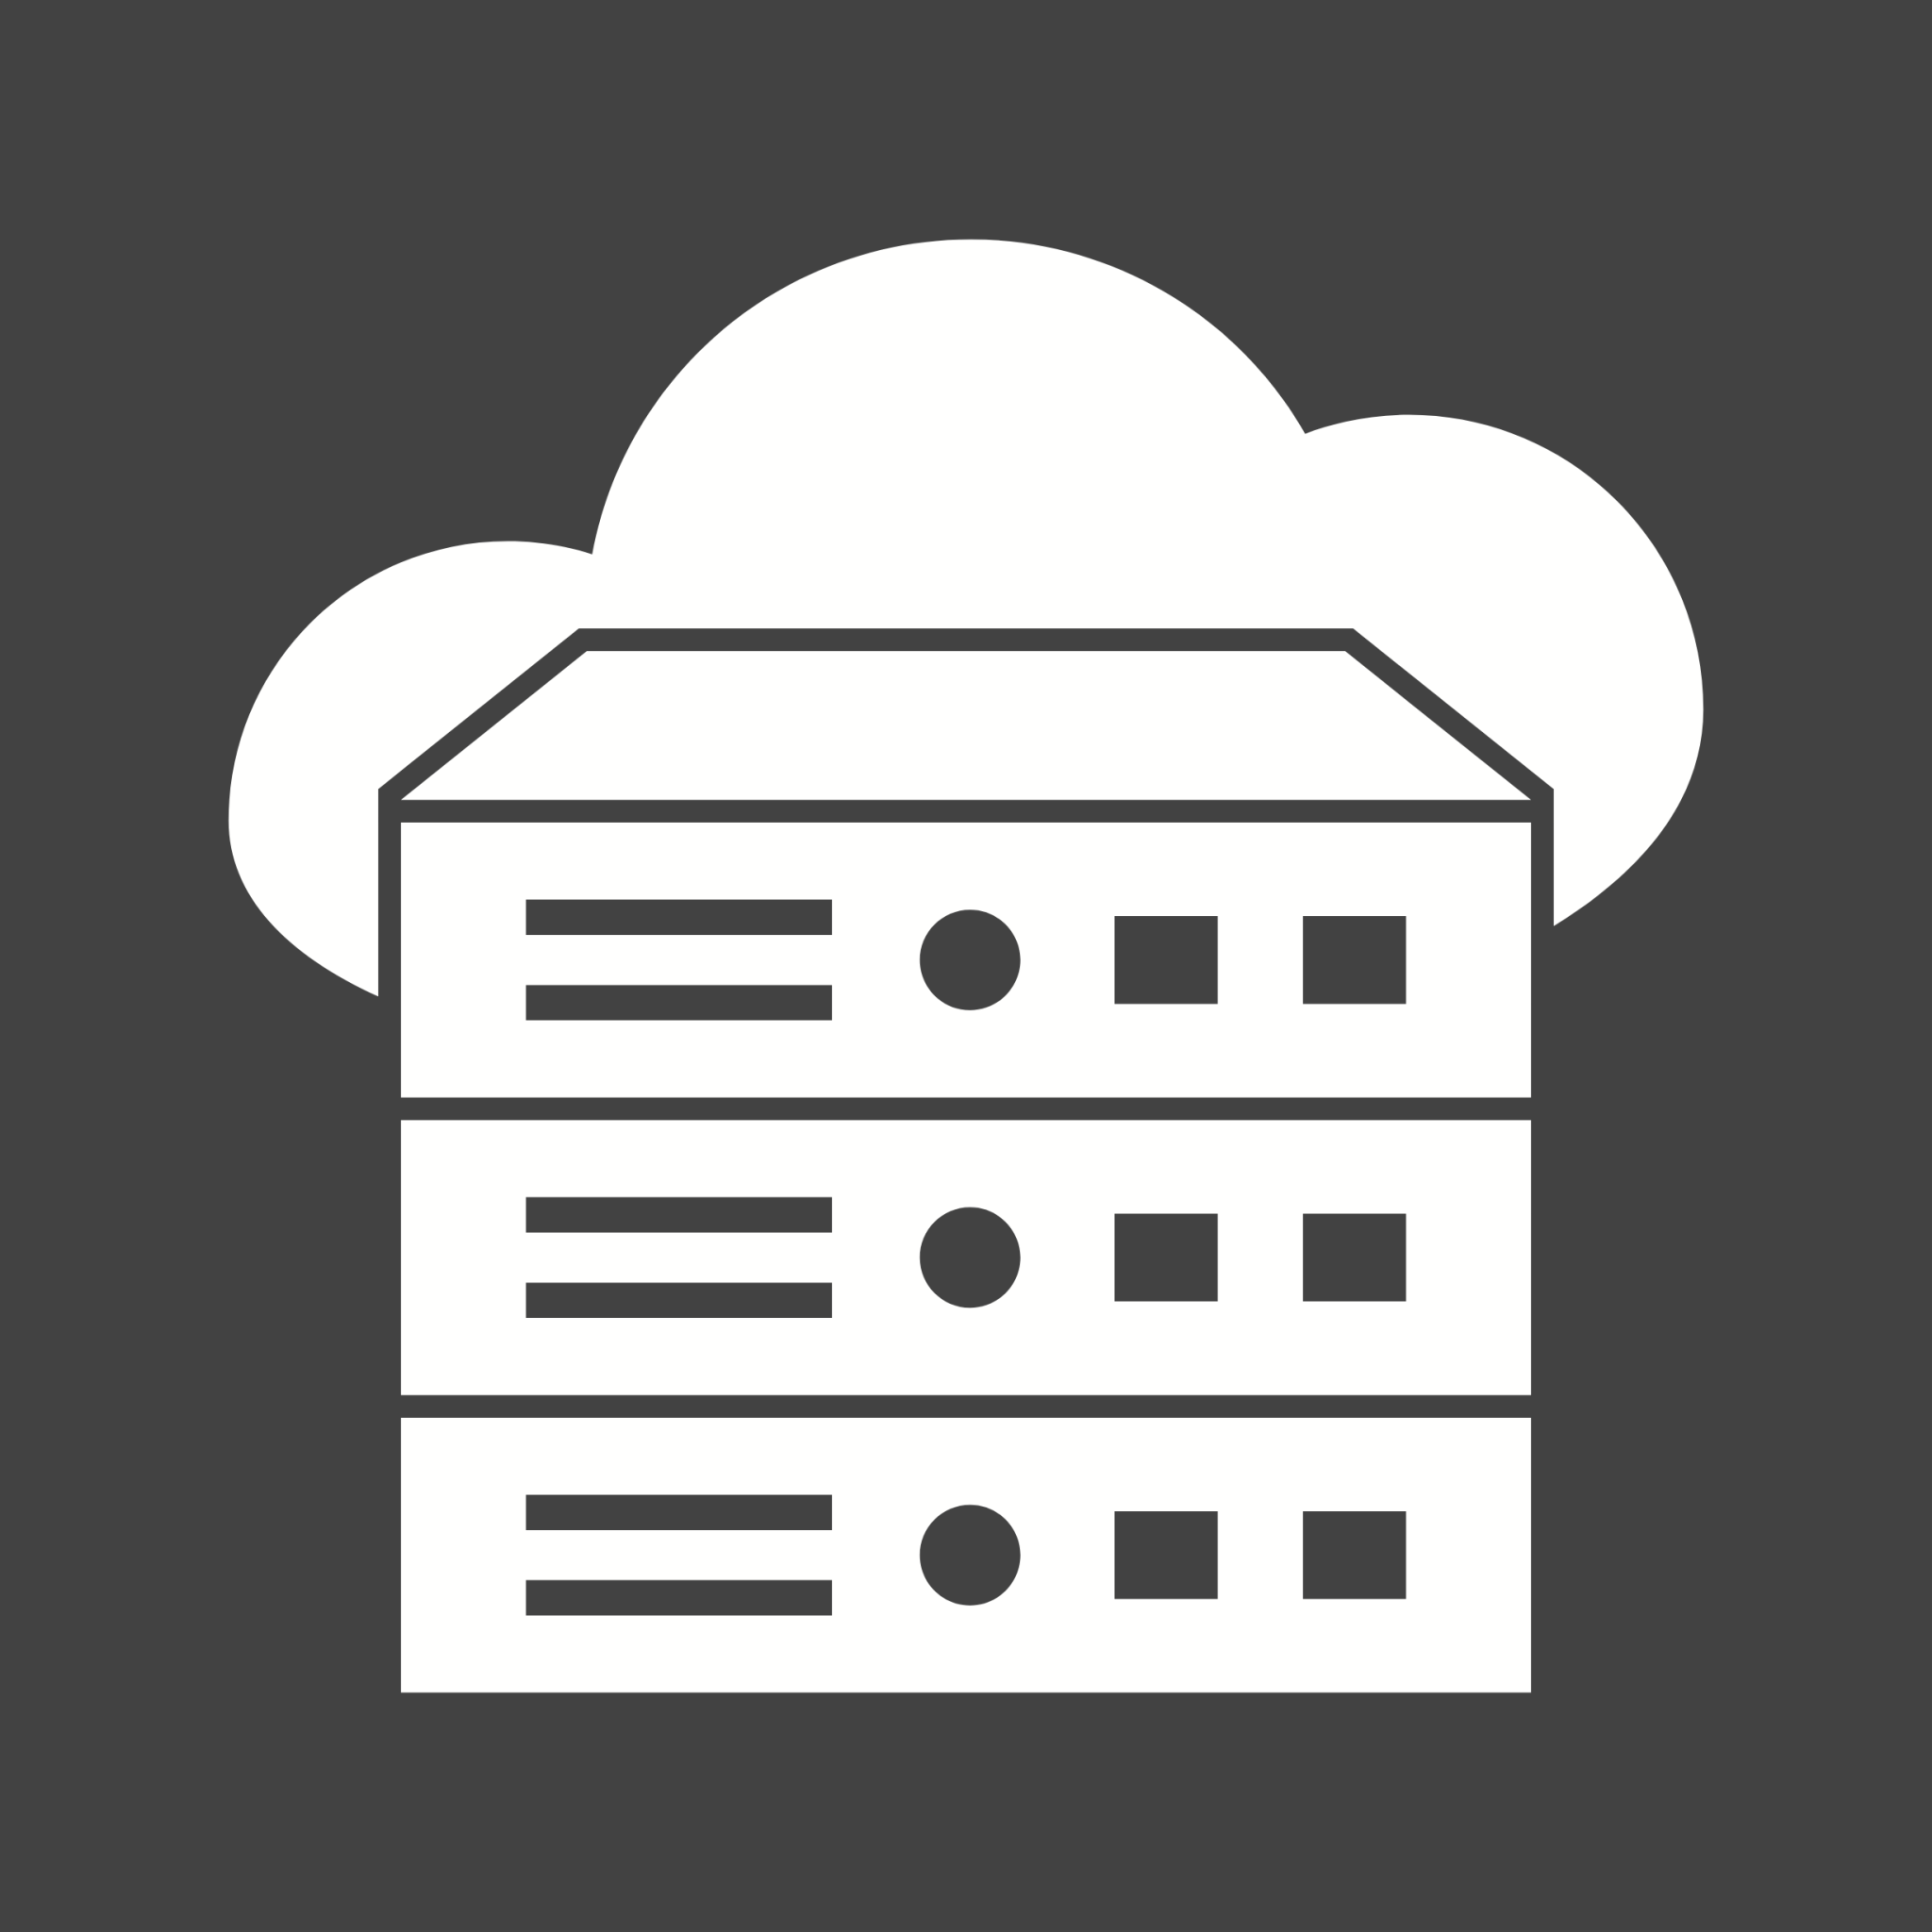 cloud storage icon png